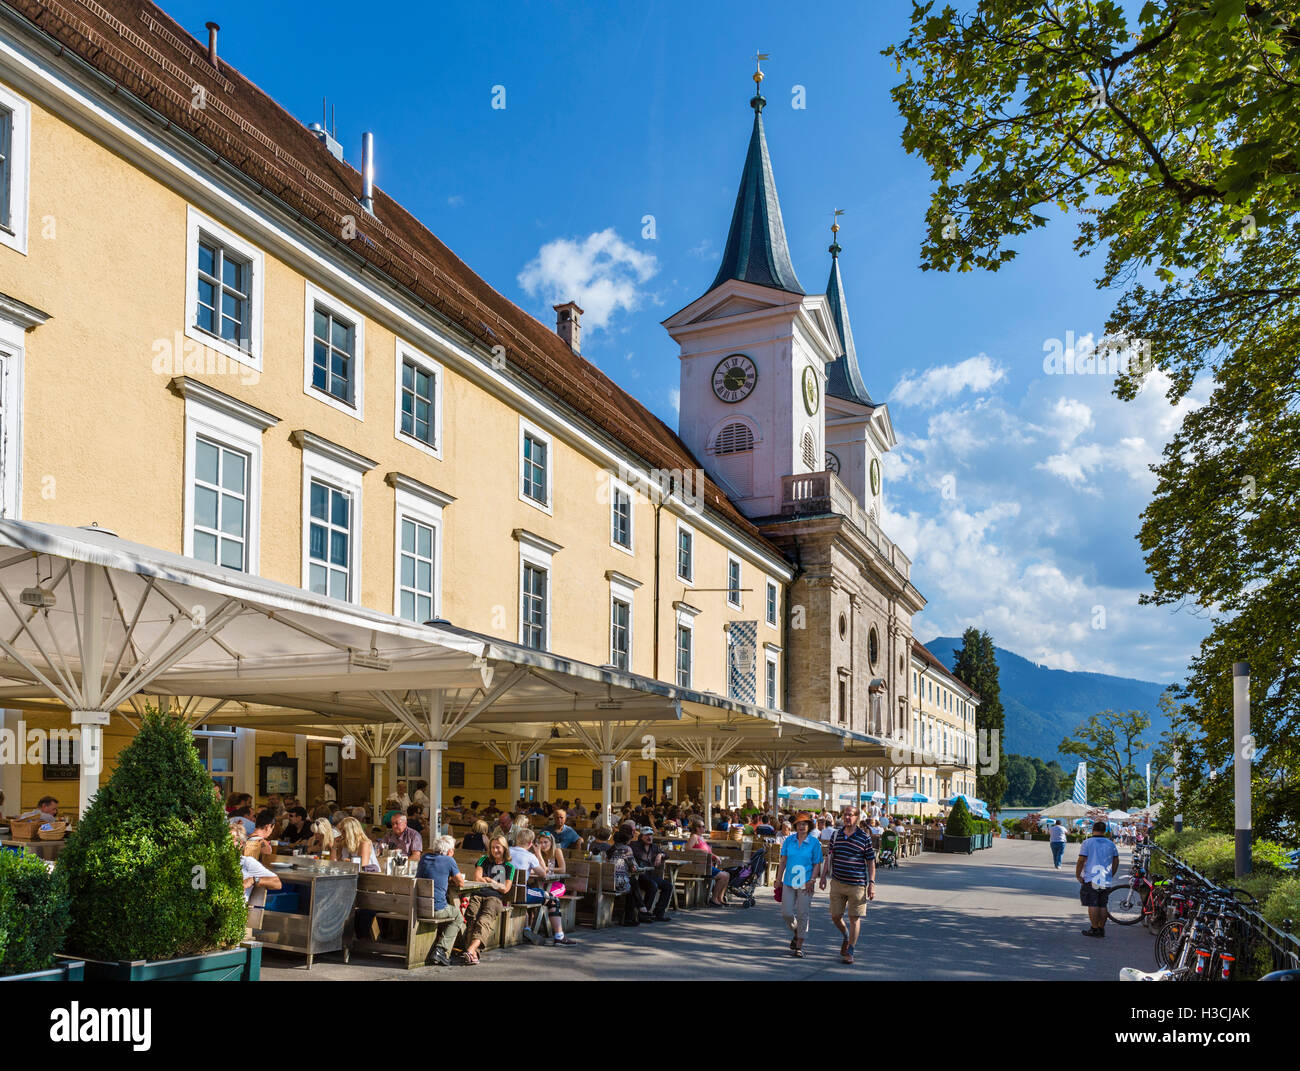 Bräustüberl in the old abbey (now known as Schloss Tegernsee) in the town of Tegernsee, Lake Tegernsee, Bavaria, Germany Stock Photo